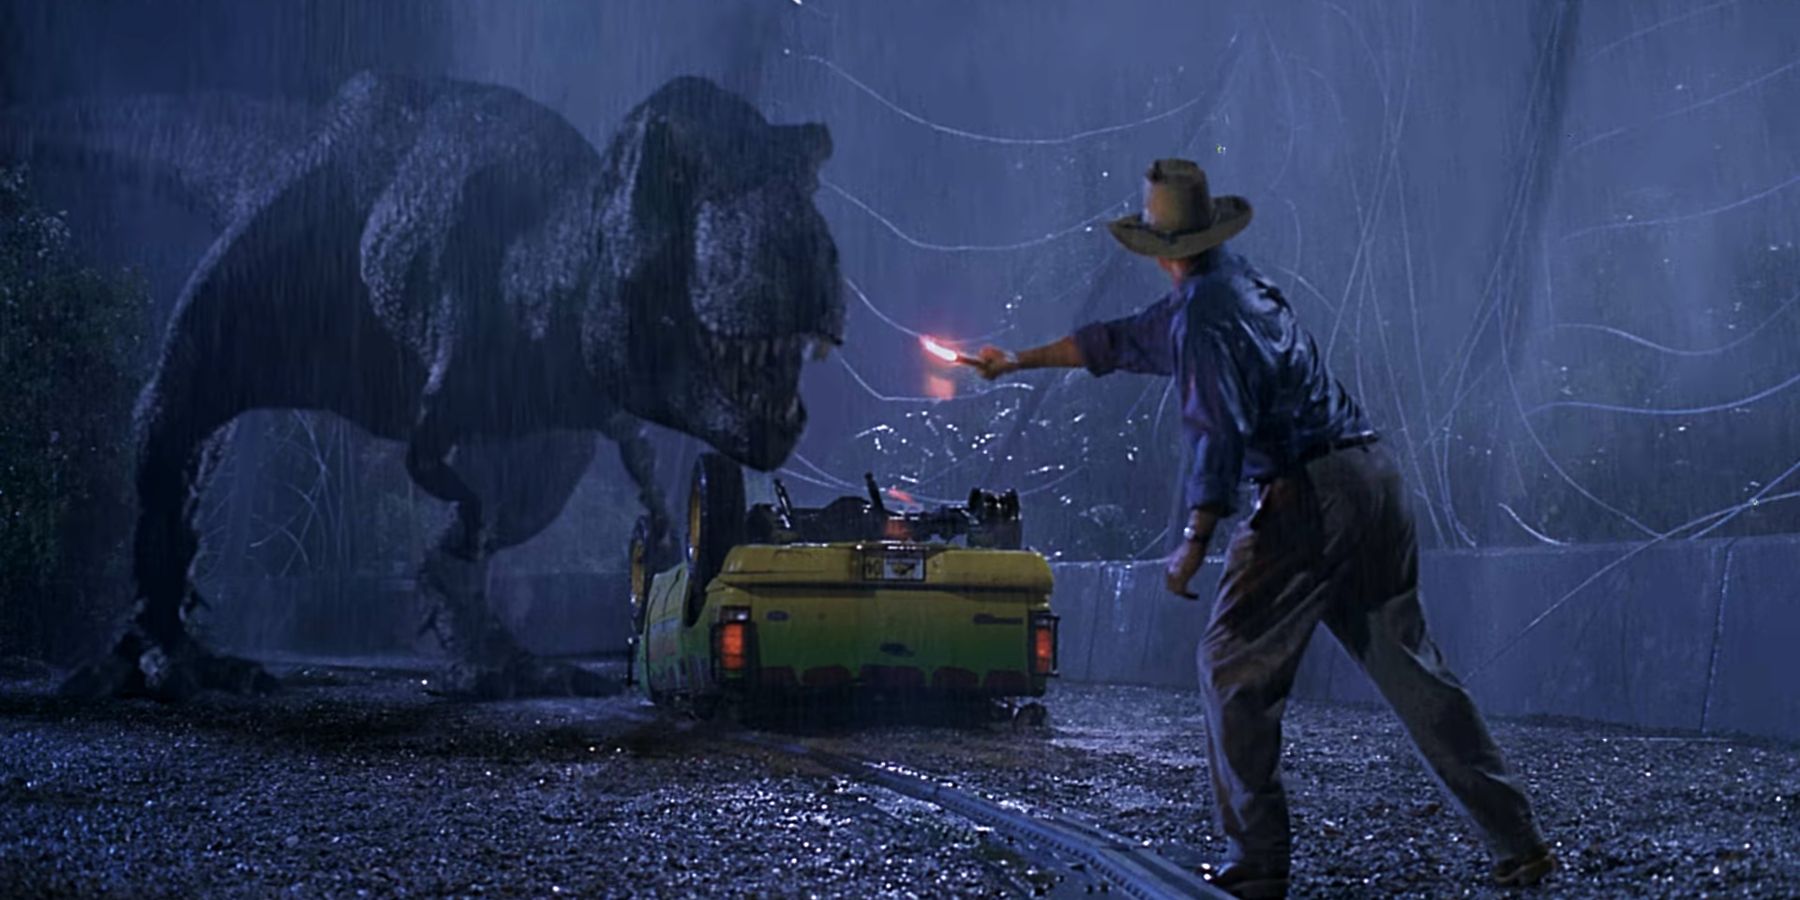 Alan Grant luring Rexy the T-Rex with a flare in Jurassic Park